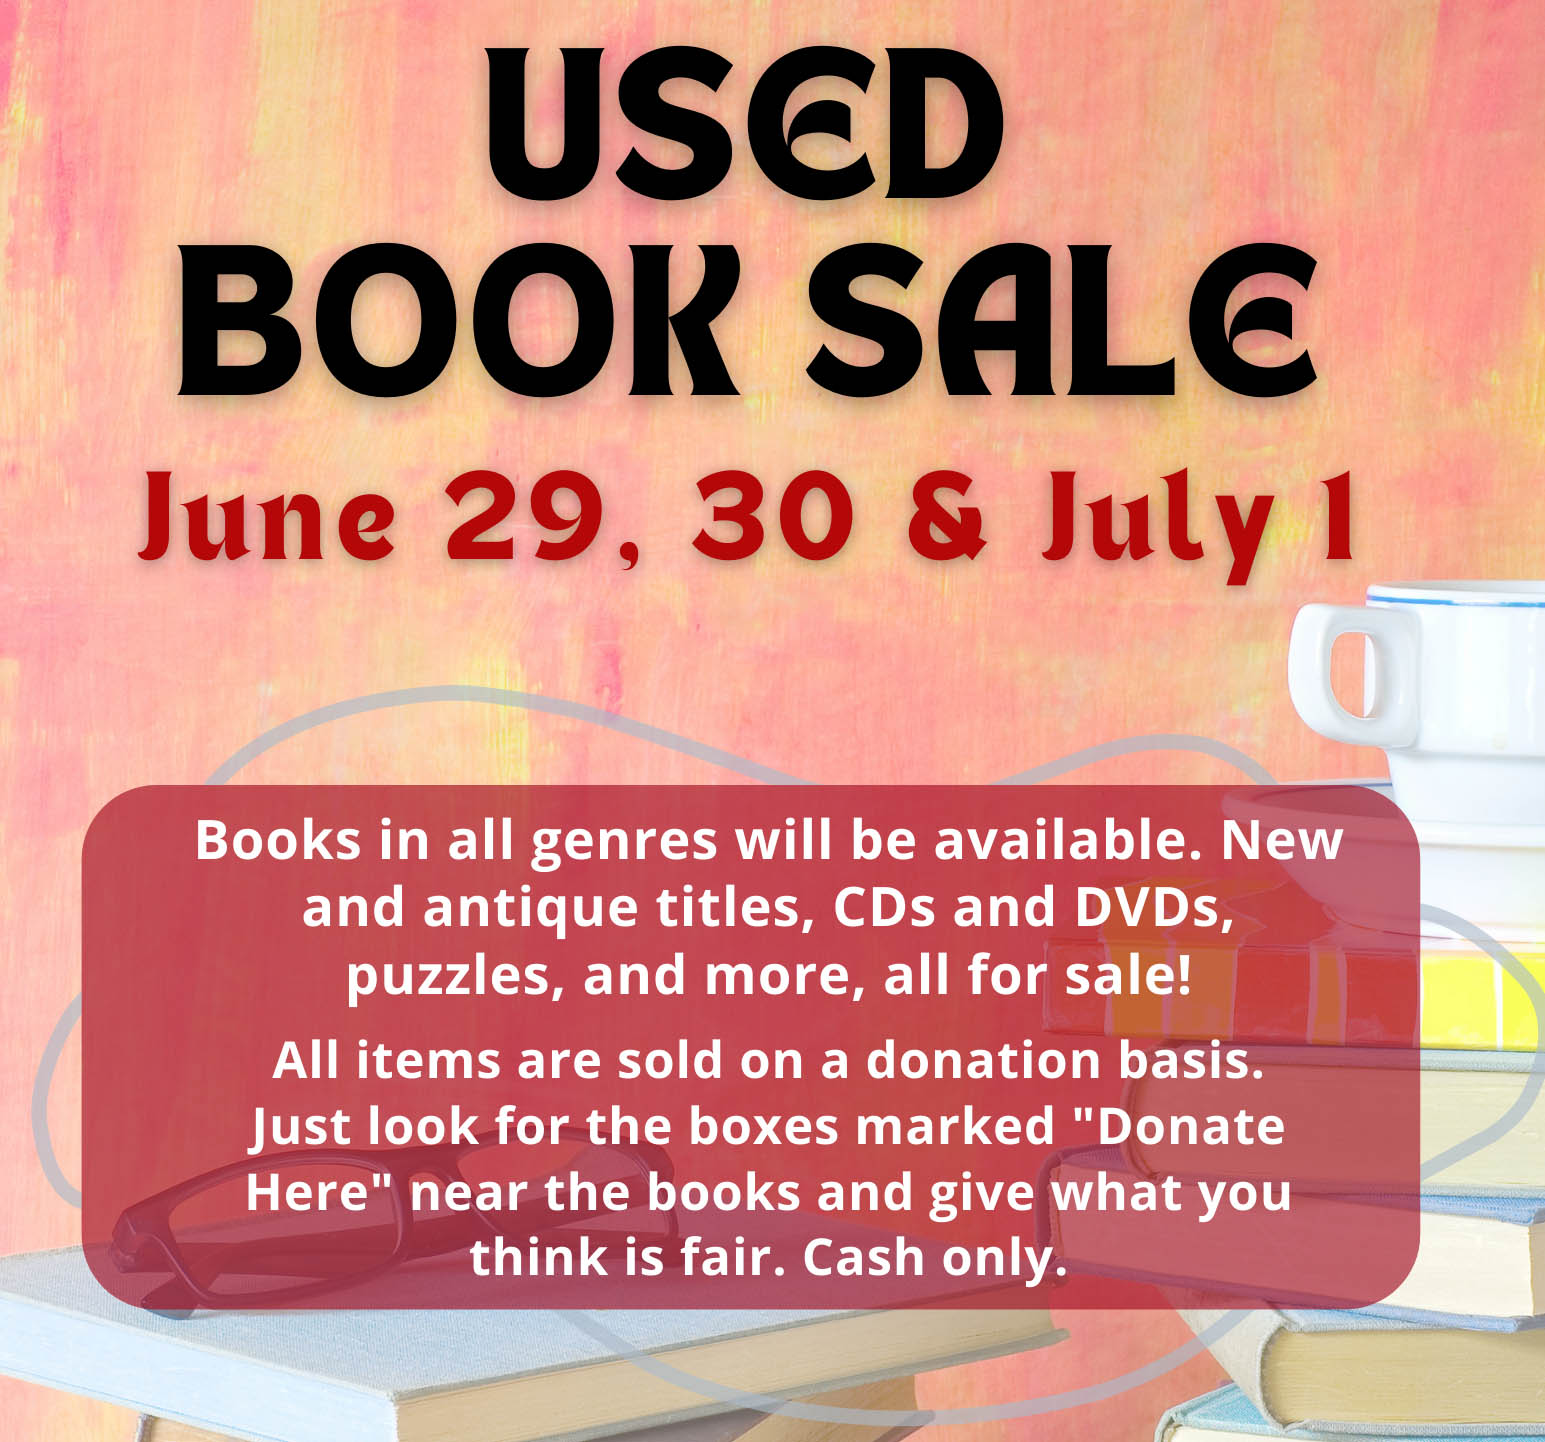 Text reads: Used Book Sale June 29, 30 & July 1. Books in all genres will be available. New and antique titles, CDs and DVDs, puzzles, and more, all for sale! All items are sold on a donation basis. Just look for the boxes marked 